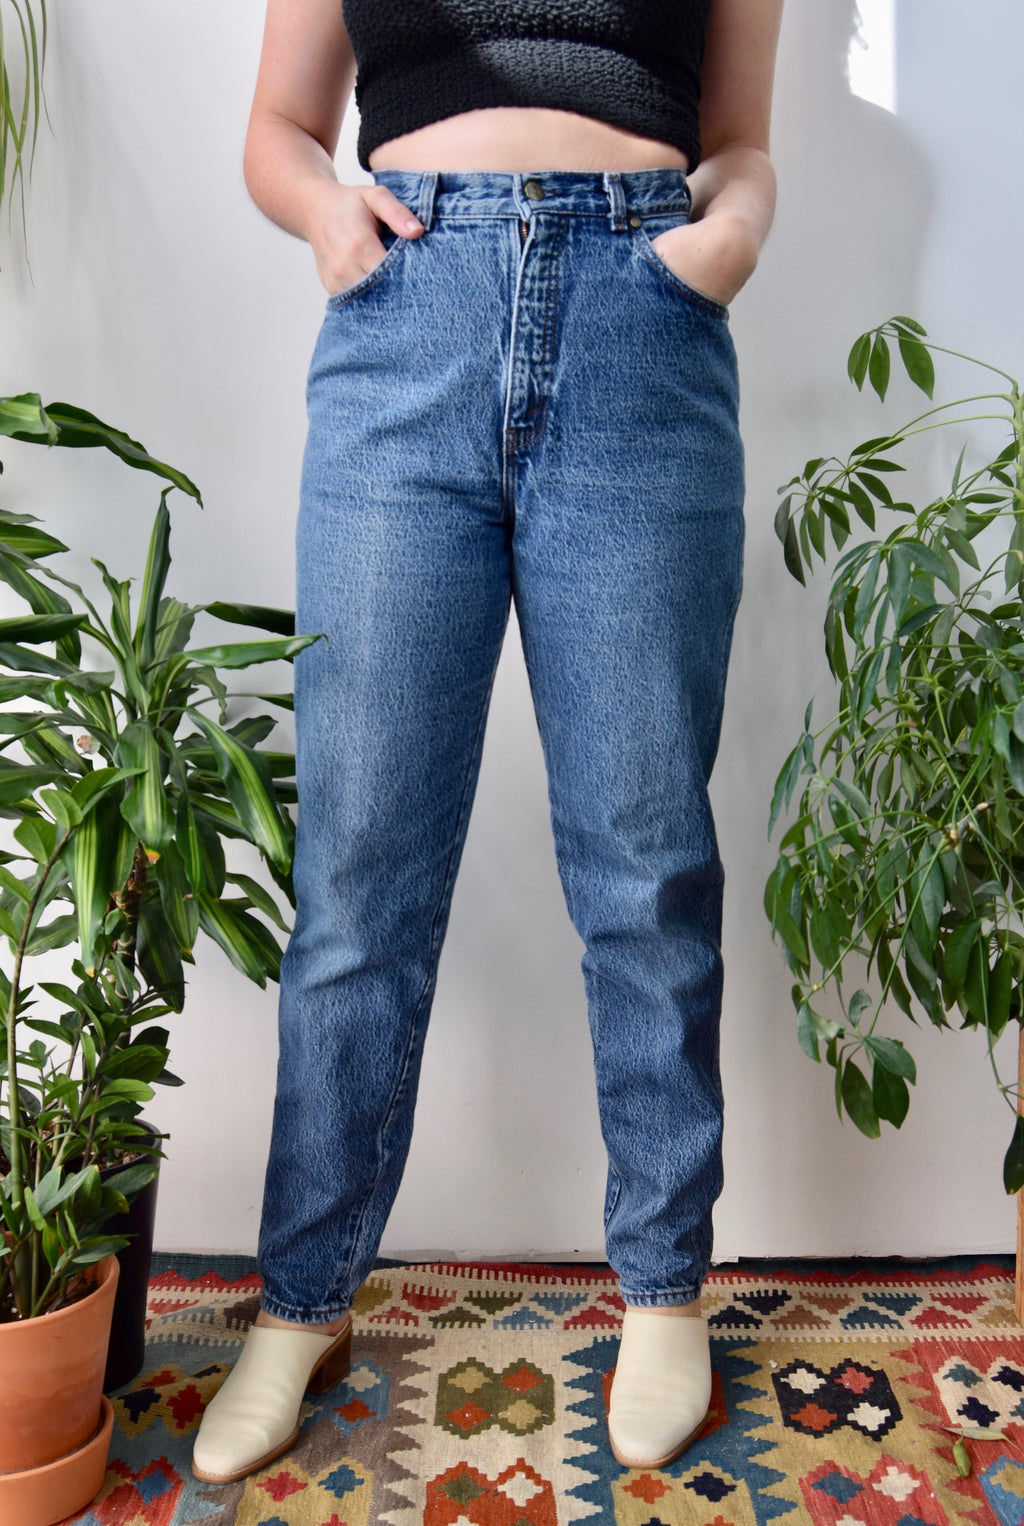 High Waisted Stone Washed Levis Jeans